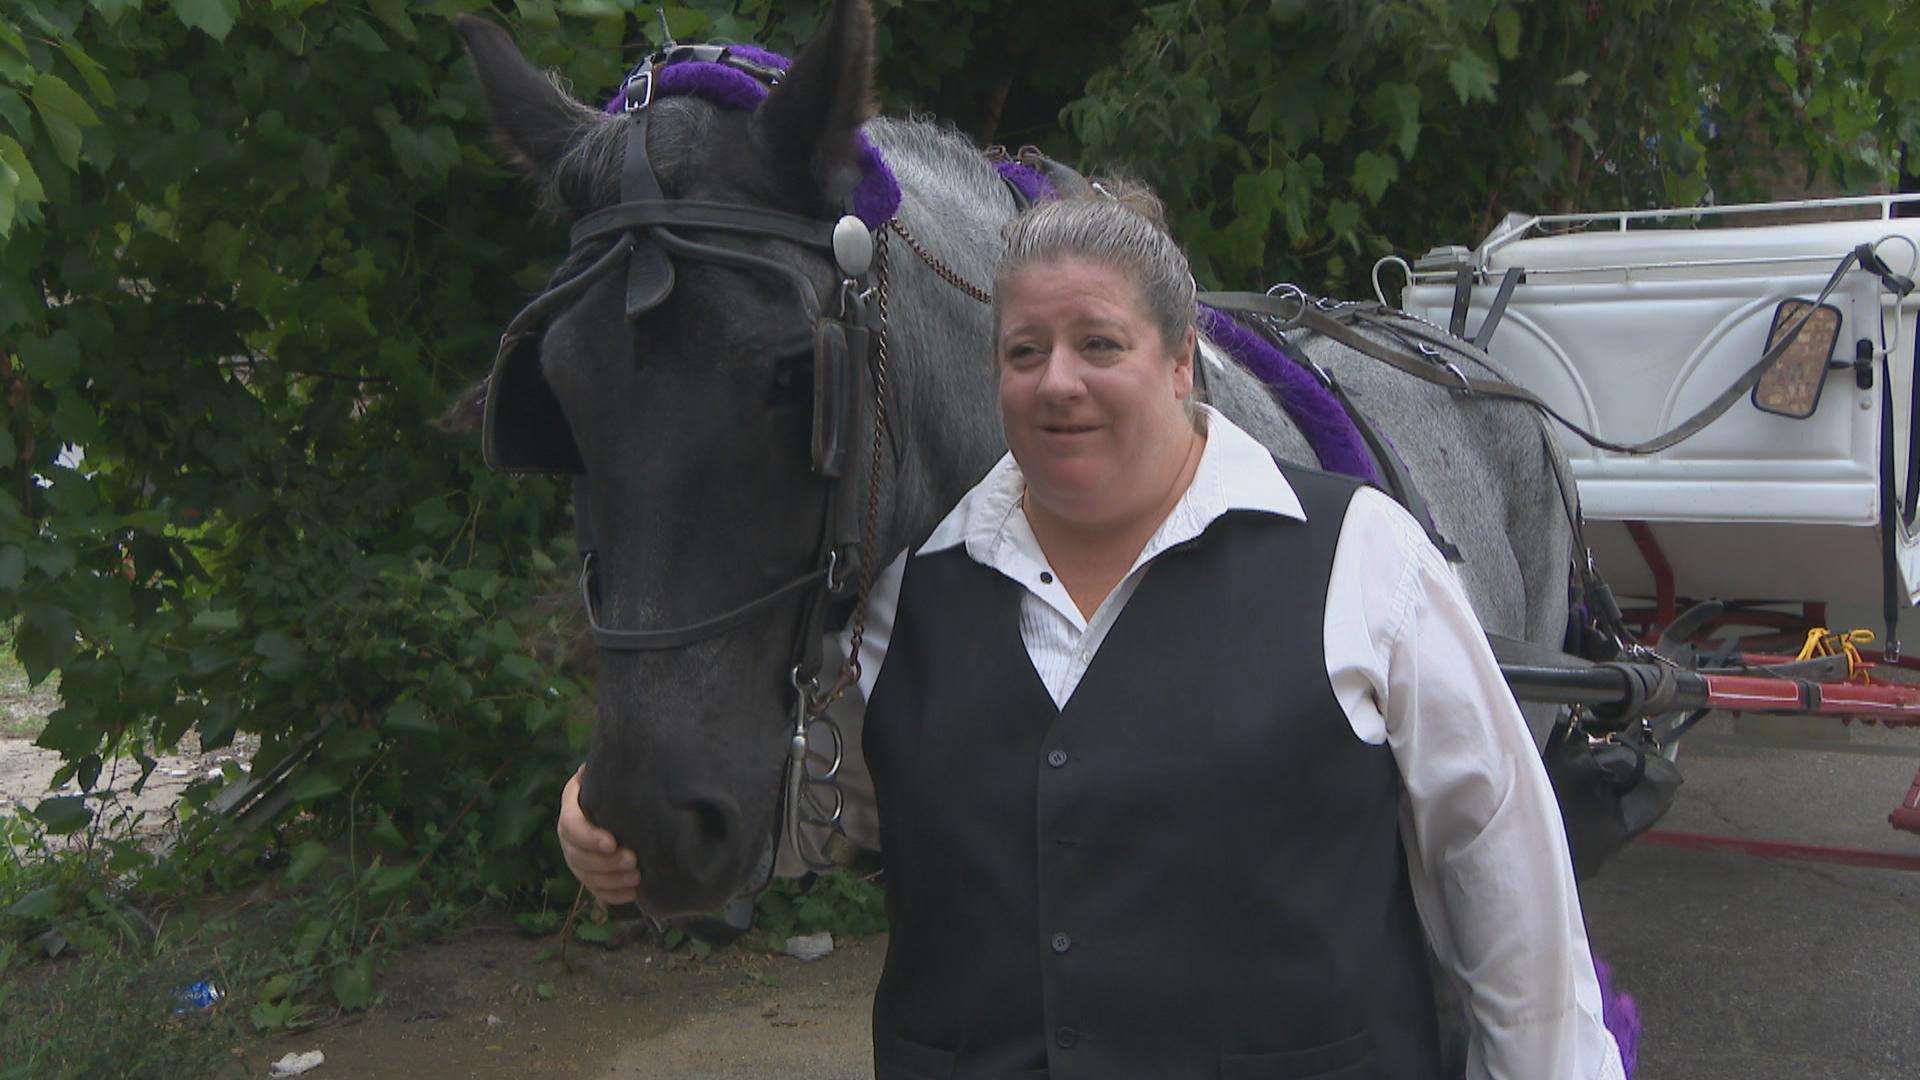 Cathy McFadden works for Antique Coach & Carriage in Chicago. She’s operated horse-drawn carriages for 35 years.